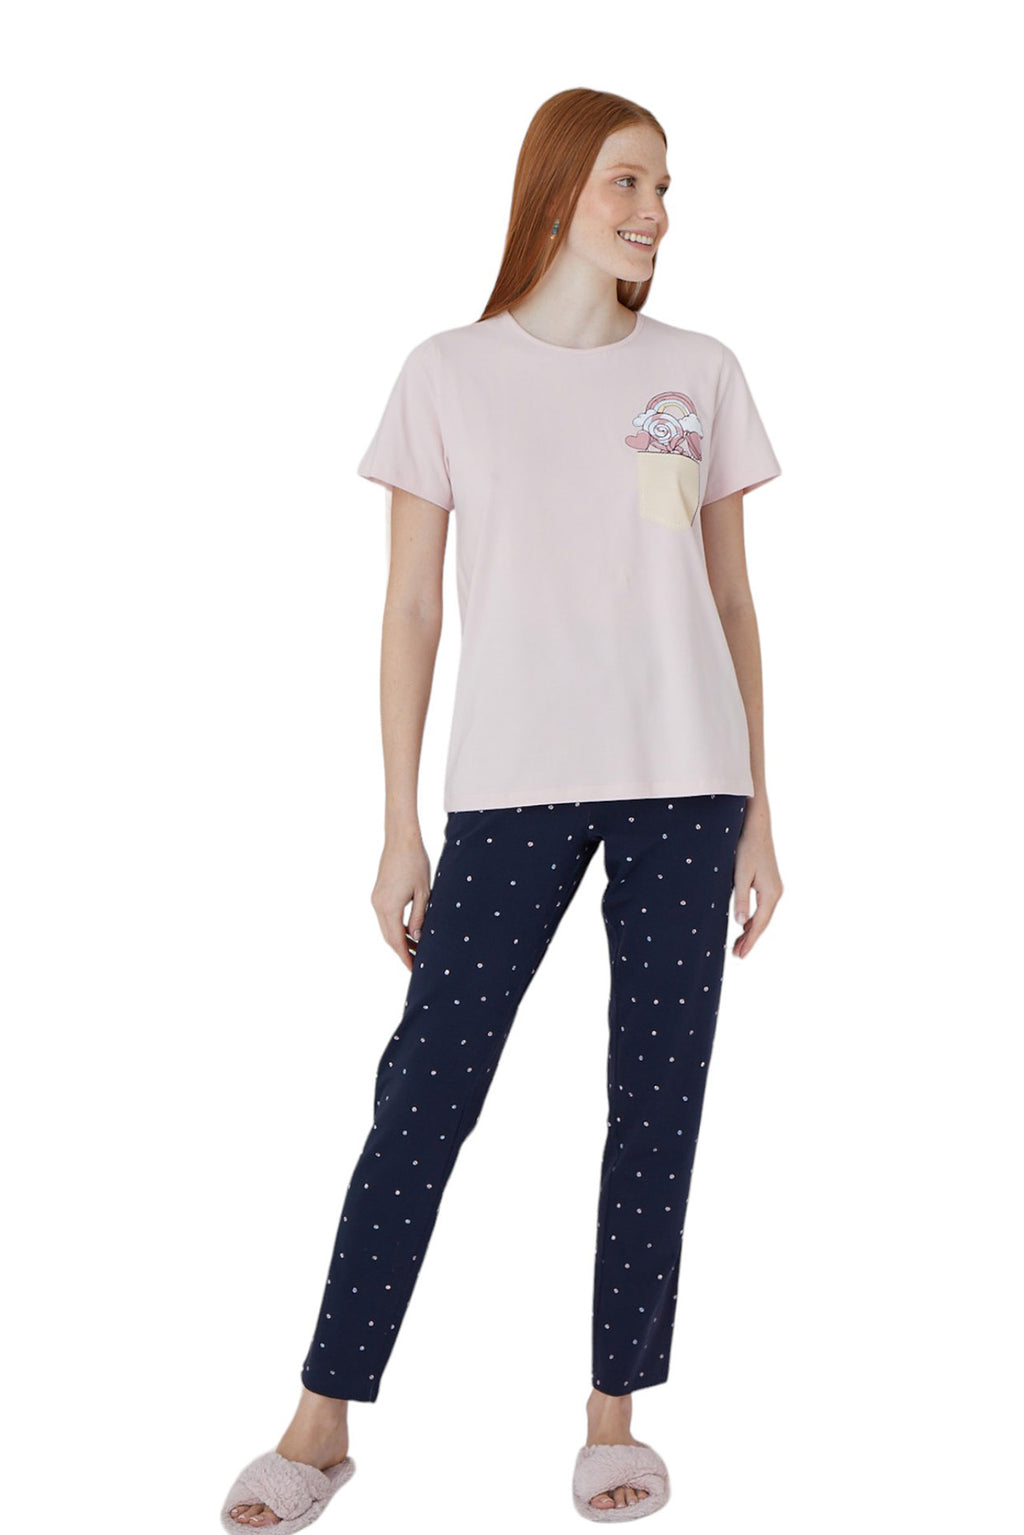 Dotted Sleepwear Pants with Plain Short Sleeve Top